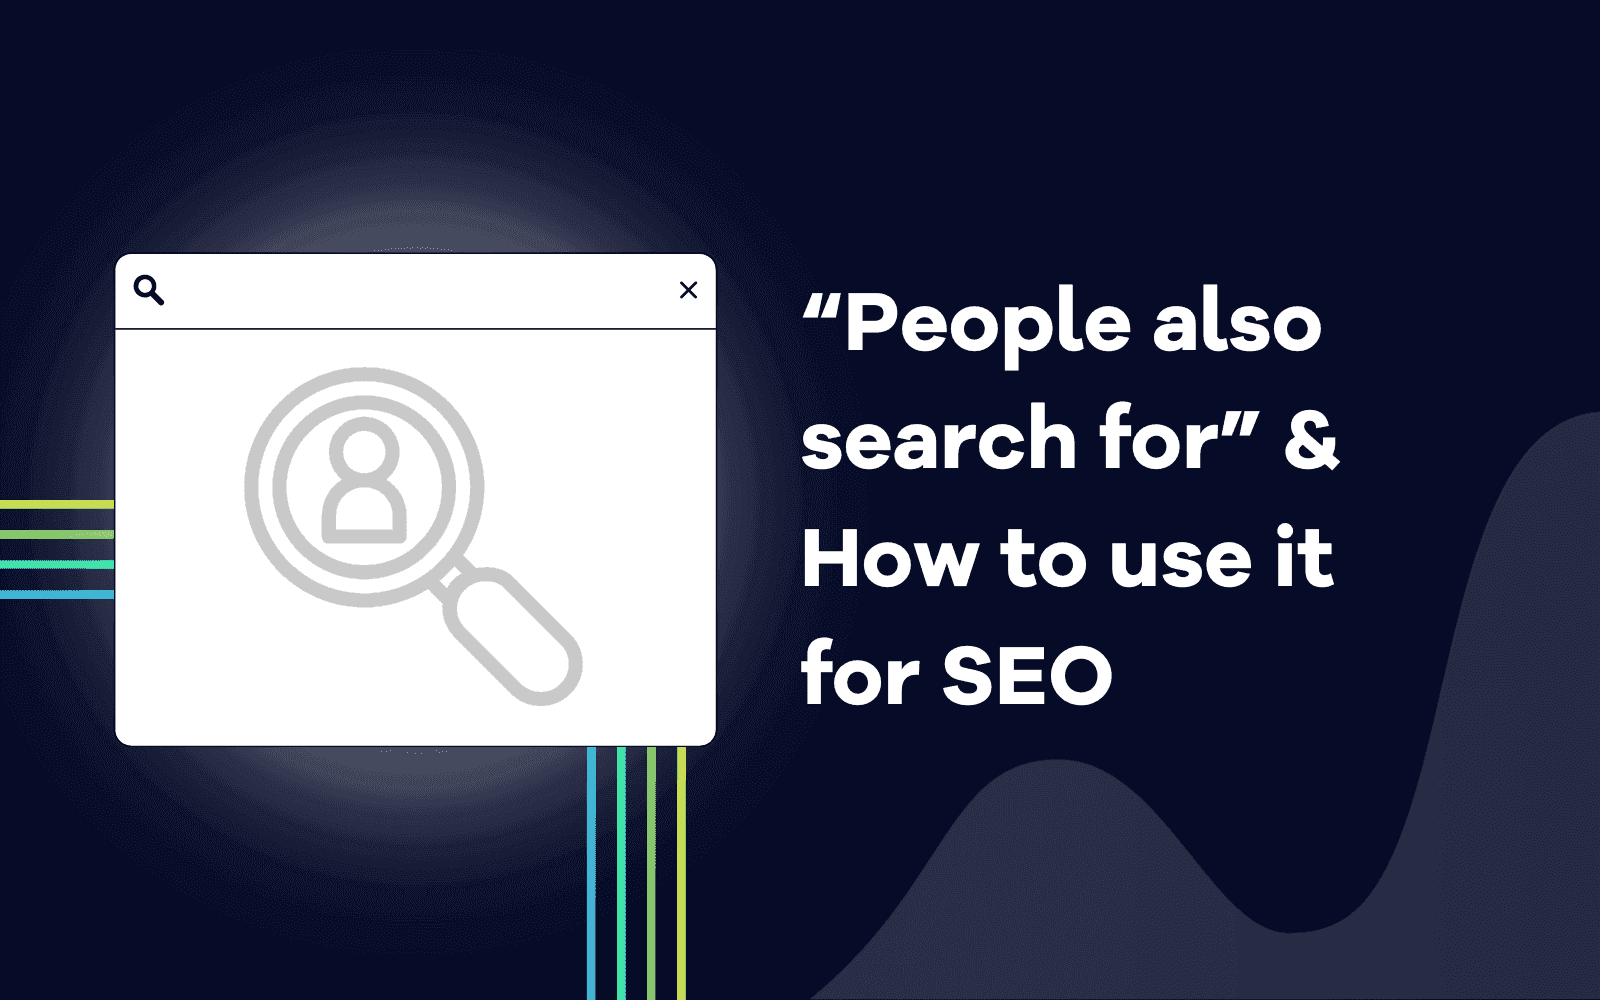 “People also search for” & How to use it for SEO